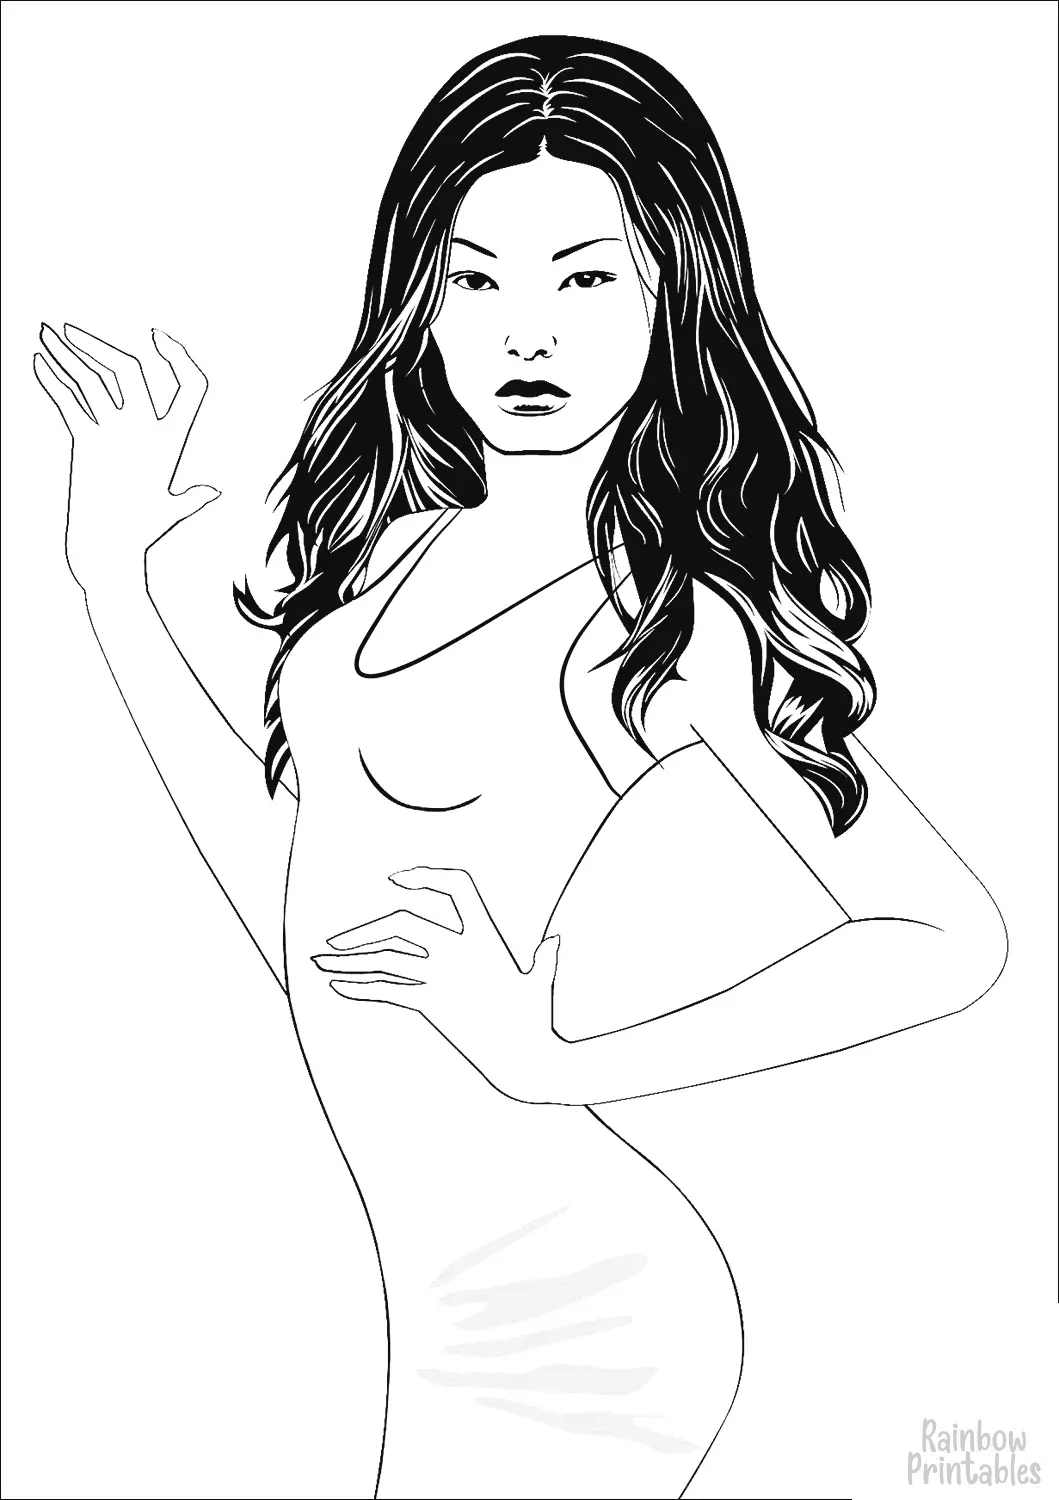 High Fashion HOT Asian woman Oriental Skinny Figure Free Clipart Coloring Pages for Kids Adults Art Activities Line Art